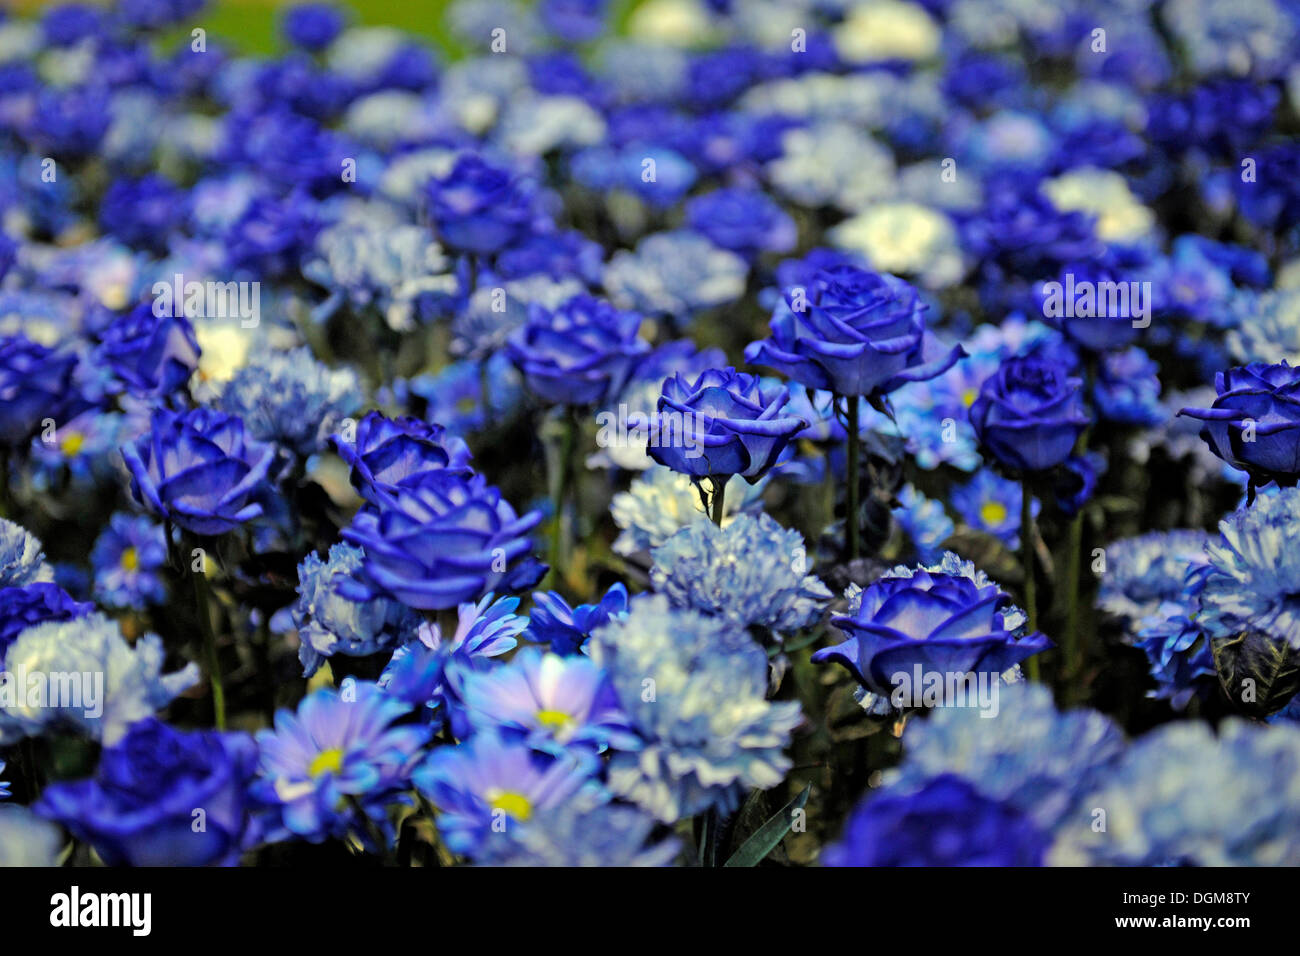 Blue Roses High Resolution Stock Photography and Images - Alamy